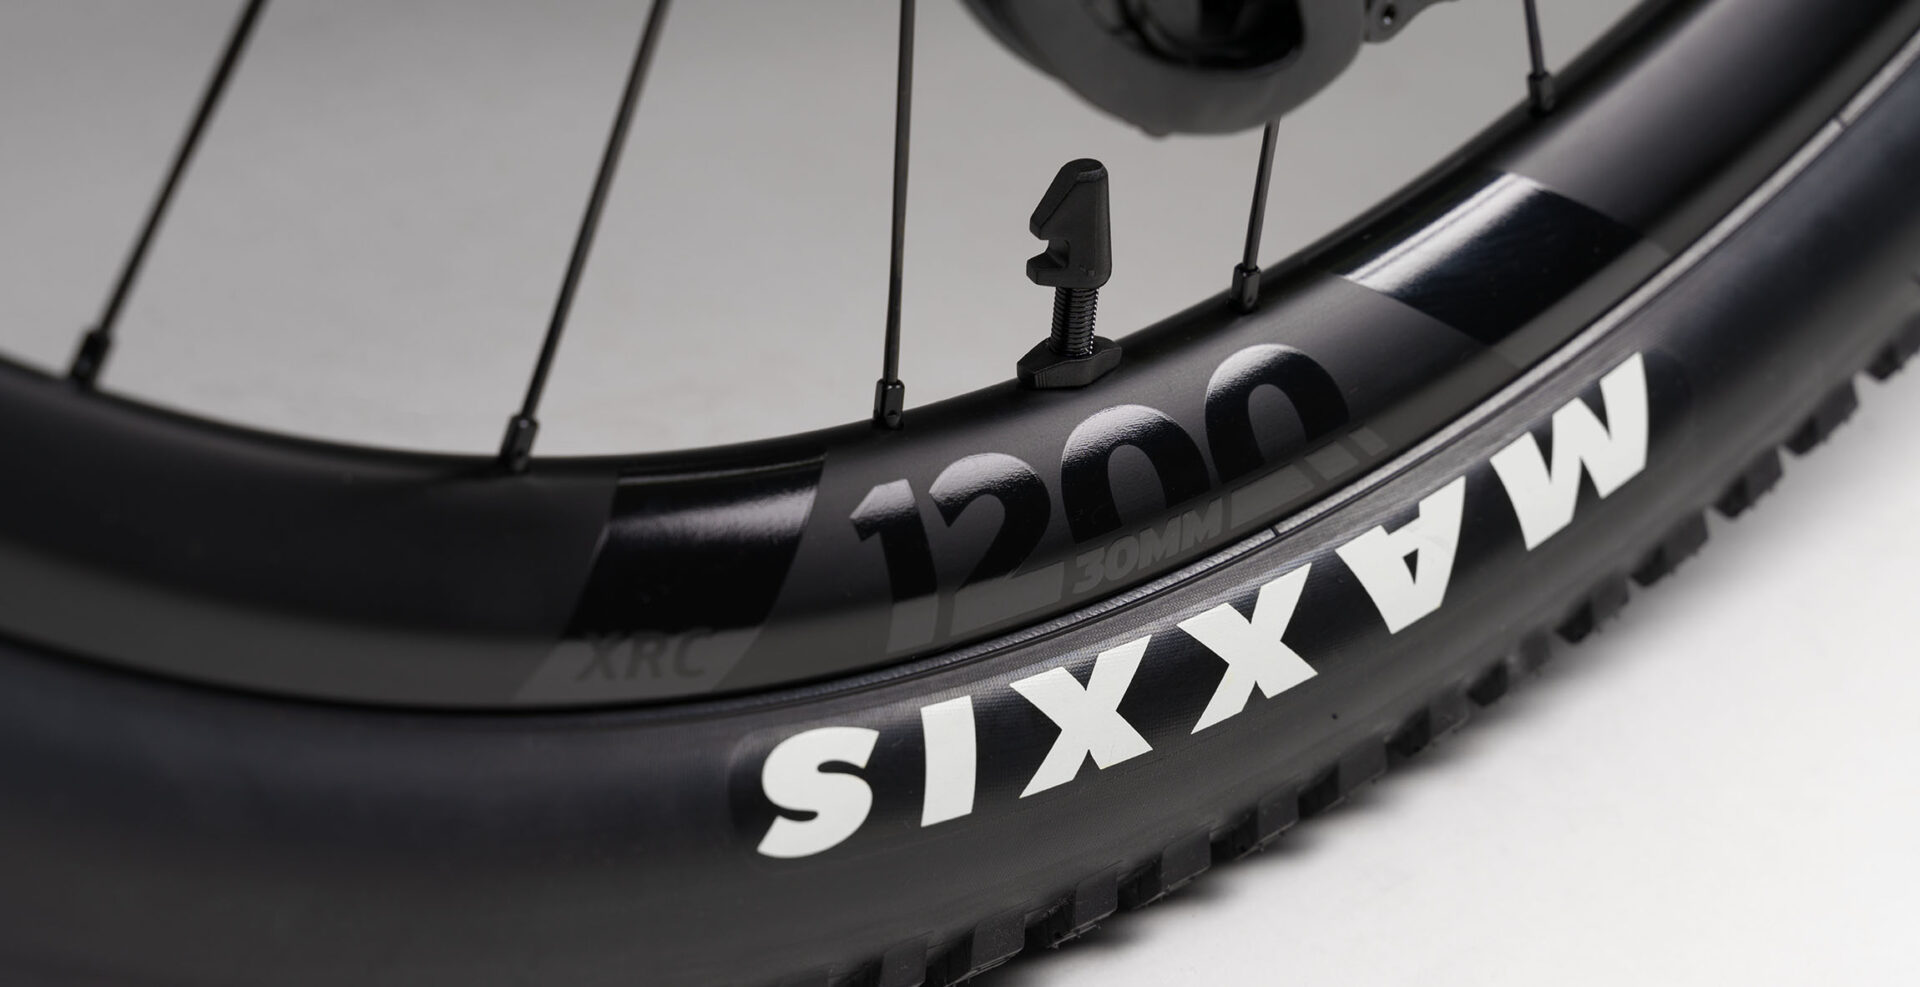 DT Swiss wheels and Maxxis Recon Race tyres